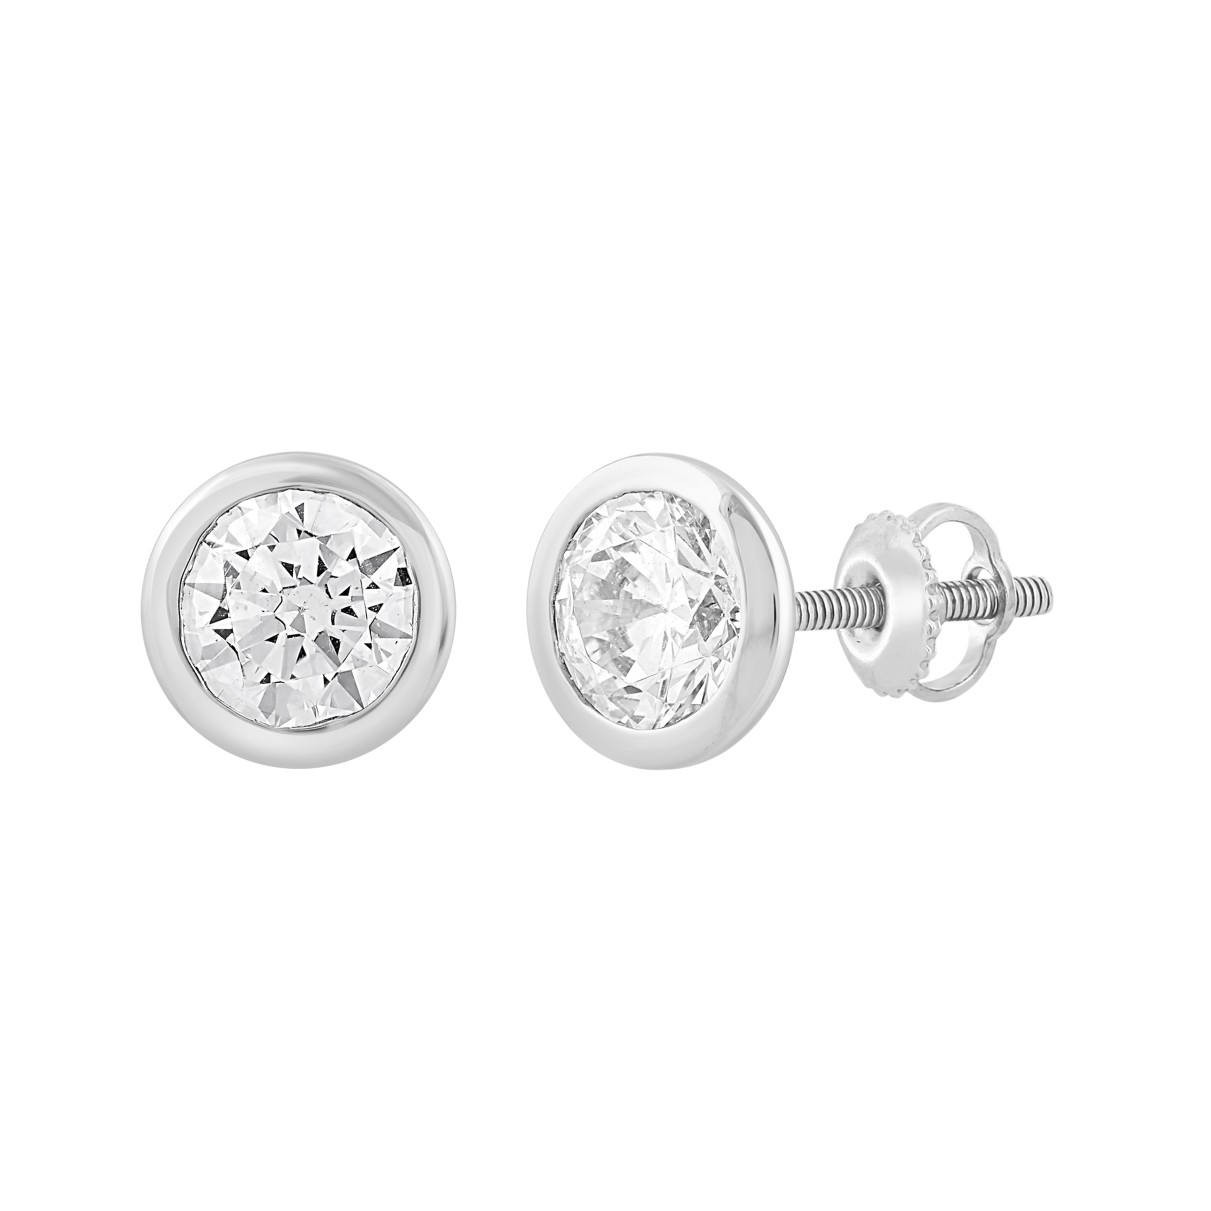 LADIES SOLITAIRE EARRINGS  3CT ROUND DIAMOND 14K WHITE GOLD